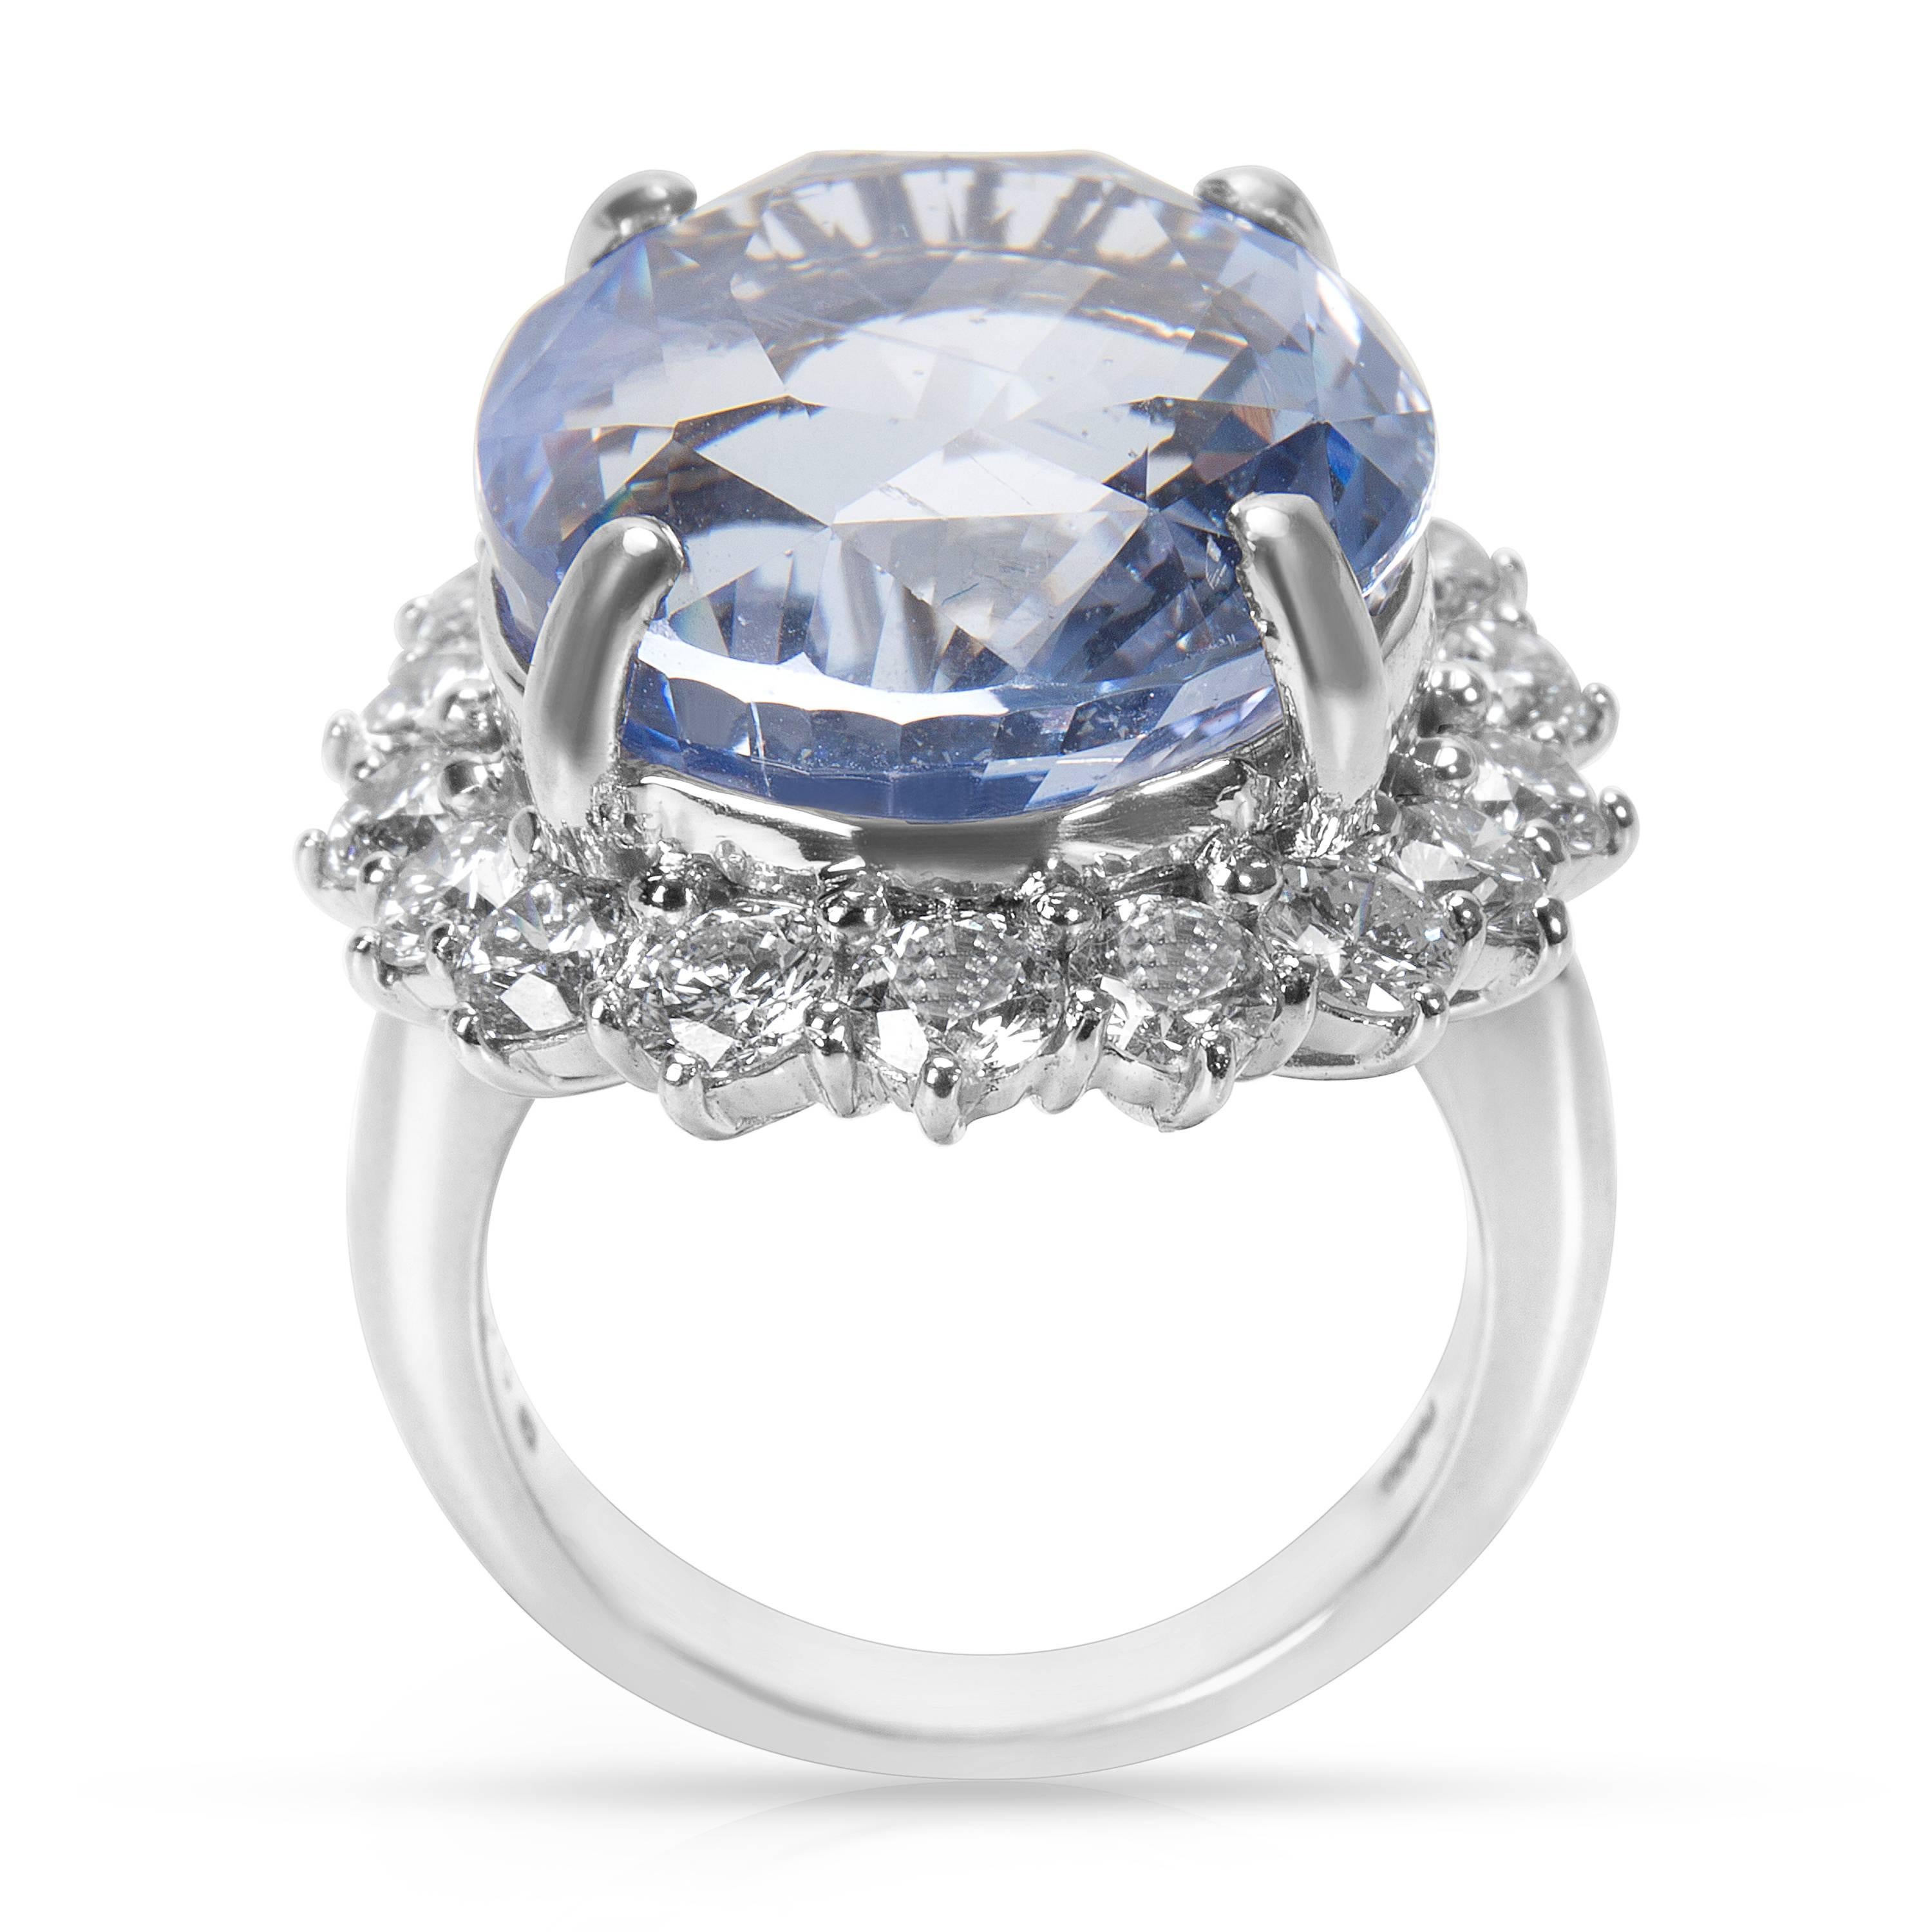 Oval Cut AGL Certified Diamond and Ceylon Blue Oval Sapphire Ring in Platinum, 2.60 Carat